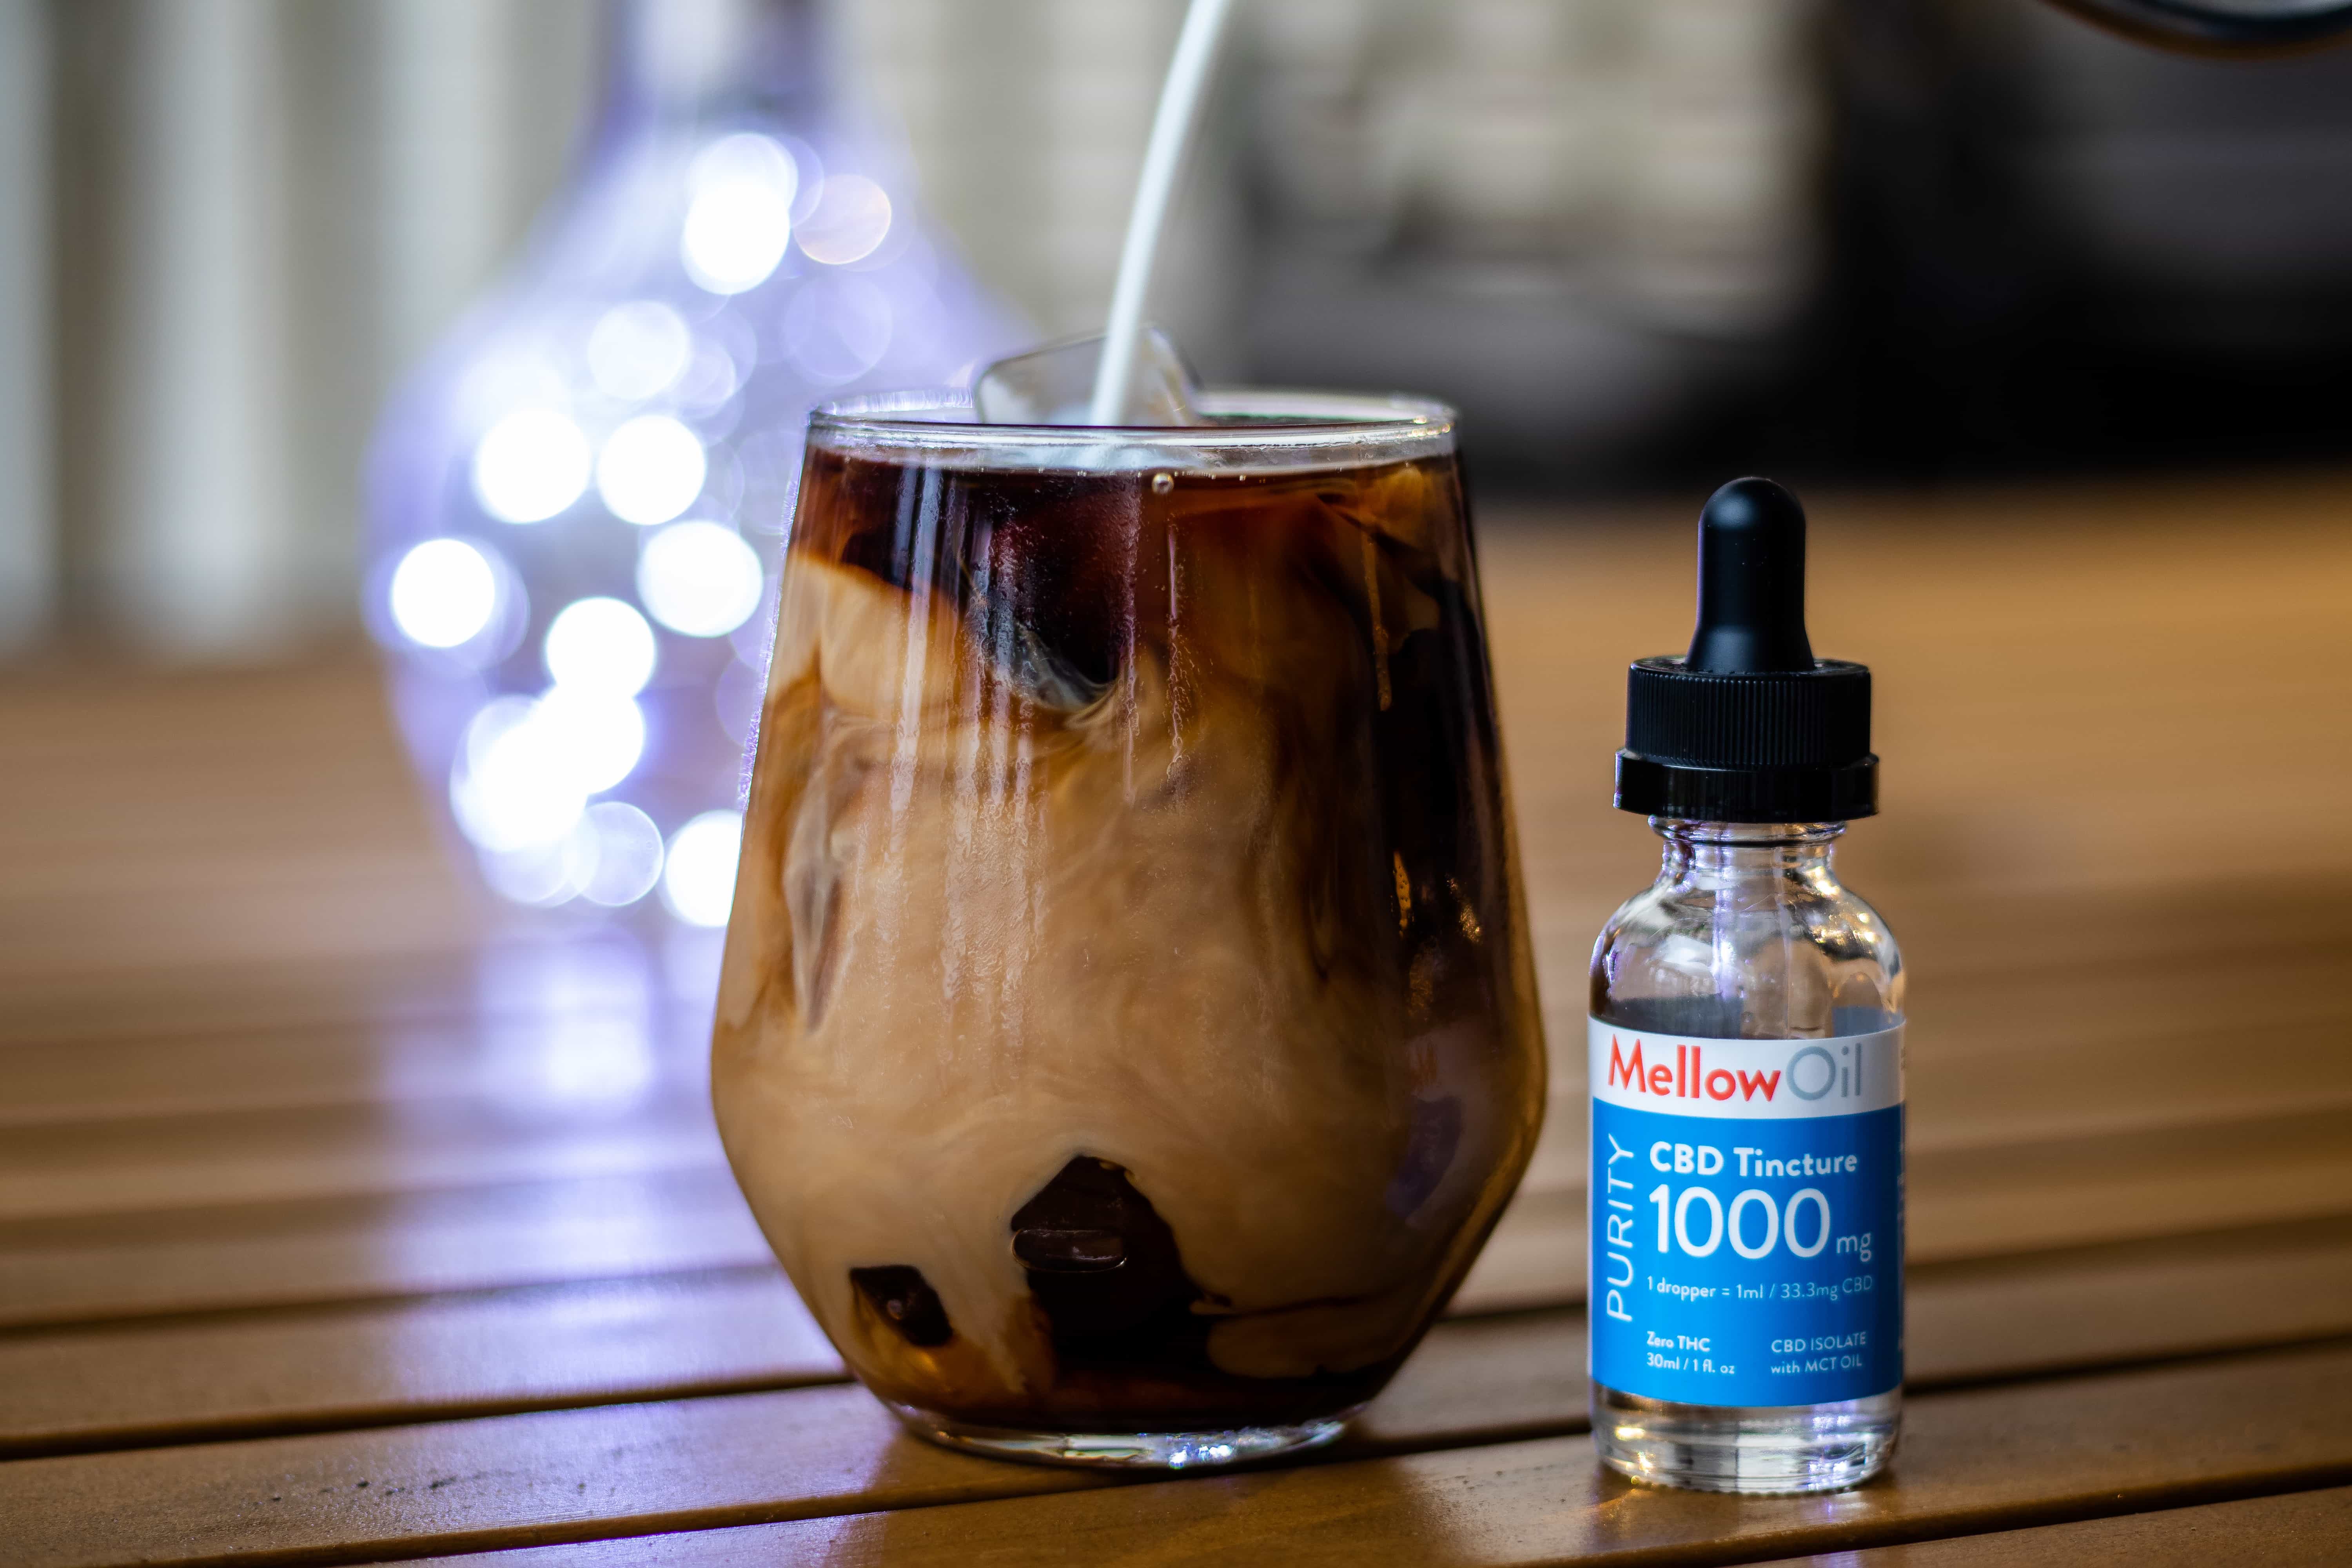 How CBD Infusion Transforms Cold Brew Coffee?